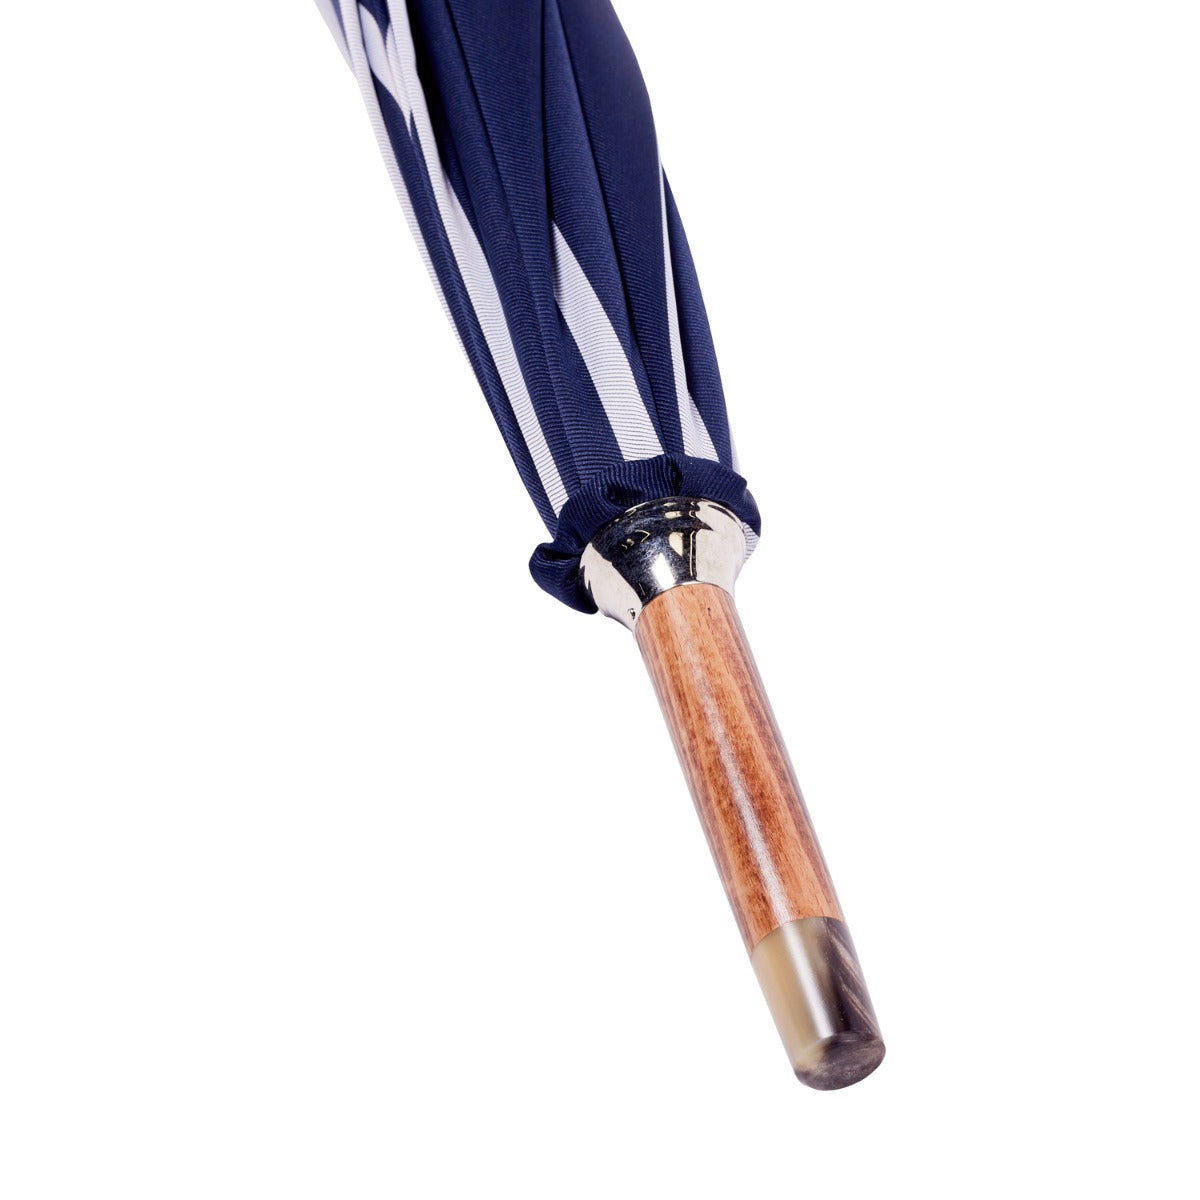 A Navy Pin Stripe Umbrella with Bamboo Handle by KirbyAllison.com